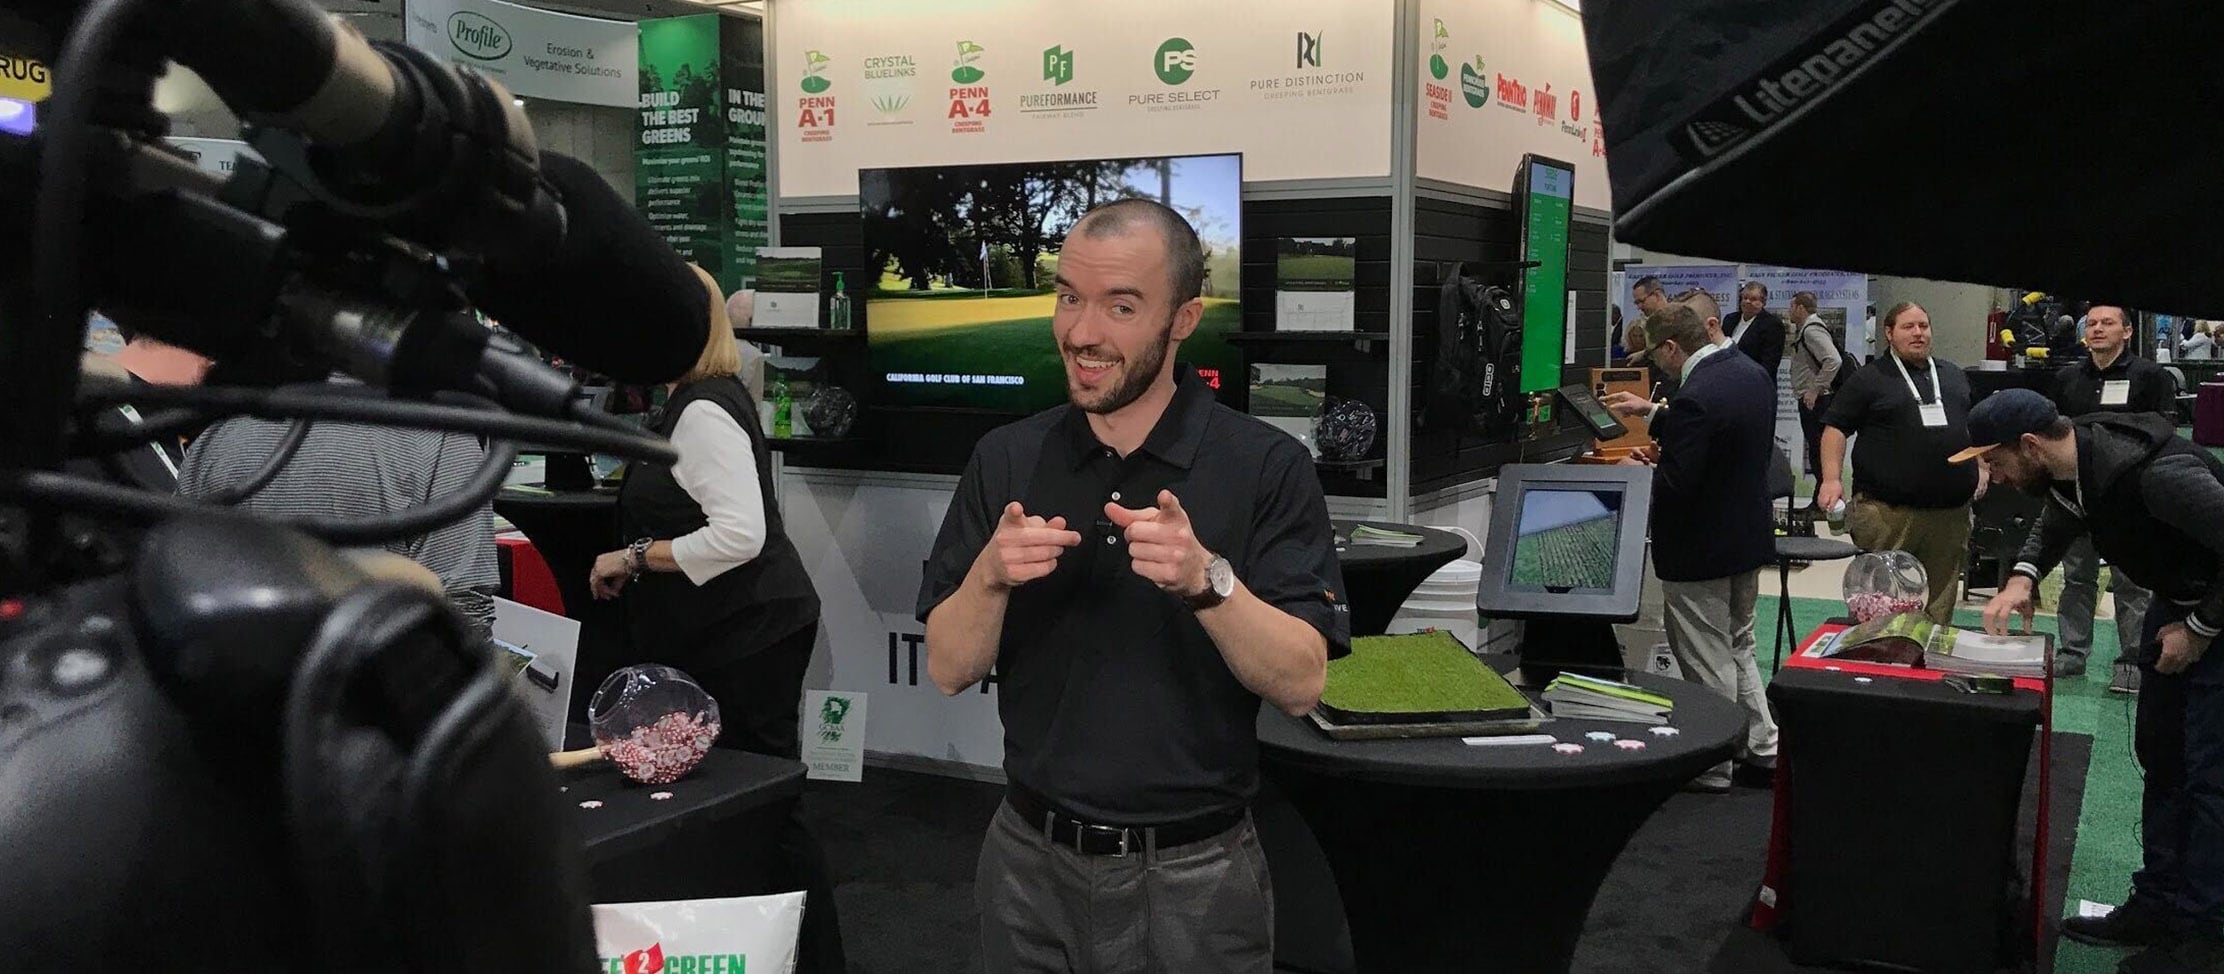 EPIC Creative employee Scott Covelli at a trade show.